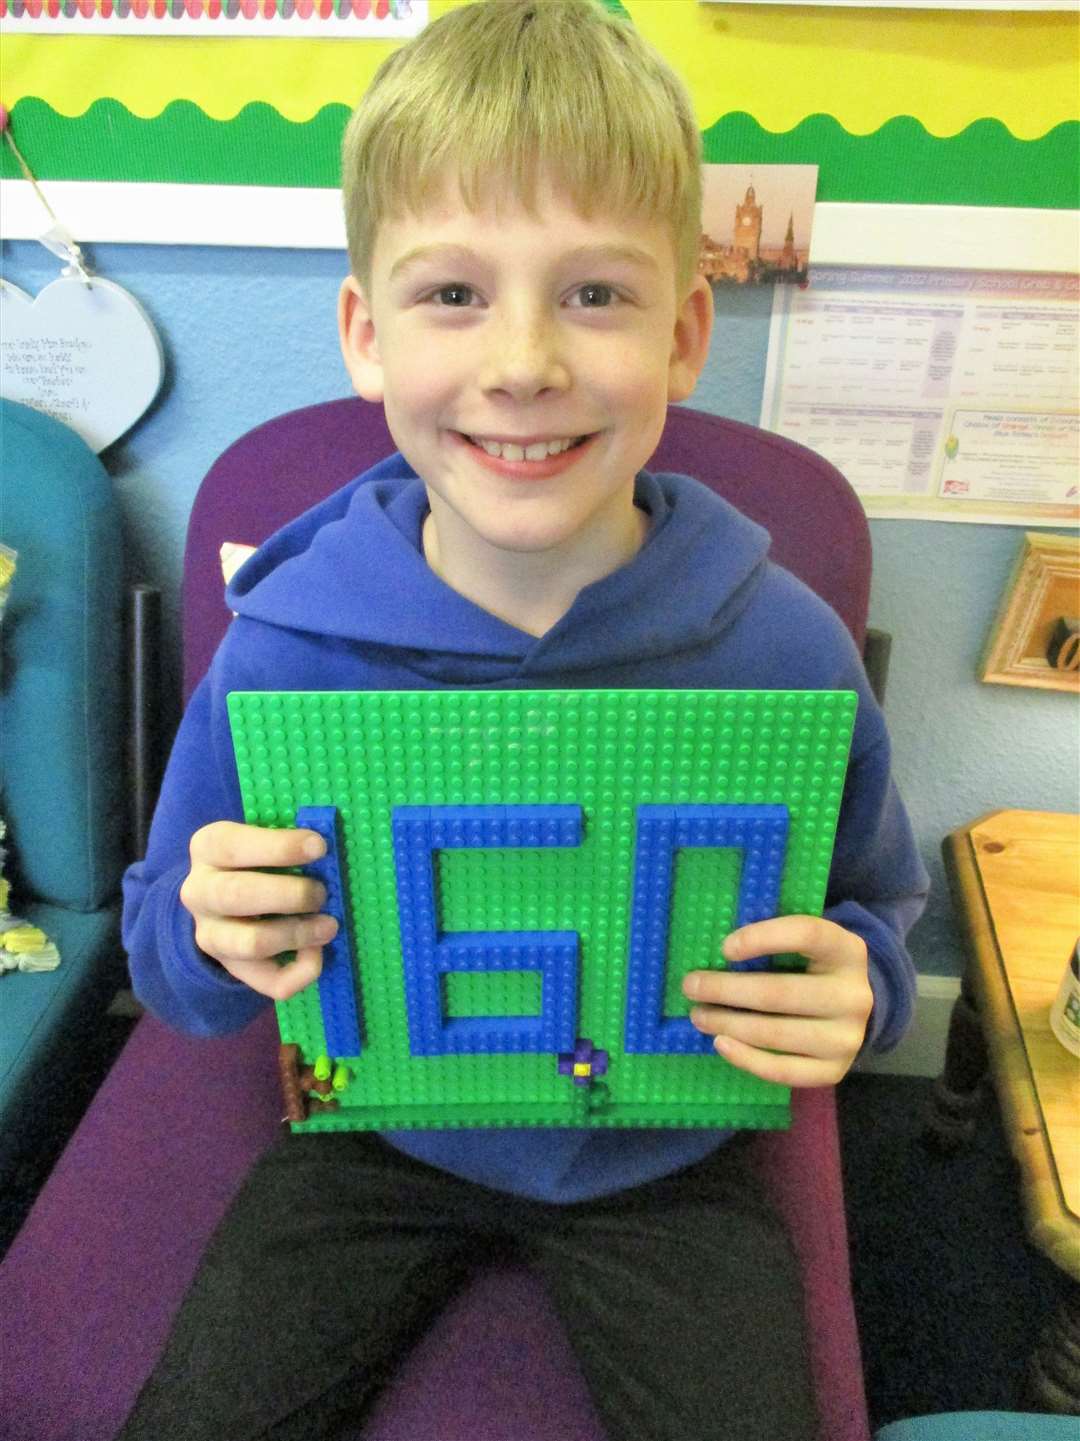 This boy made the number 160 from Lego bricks.